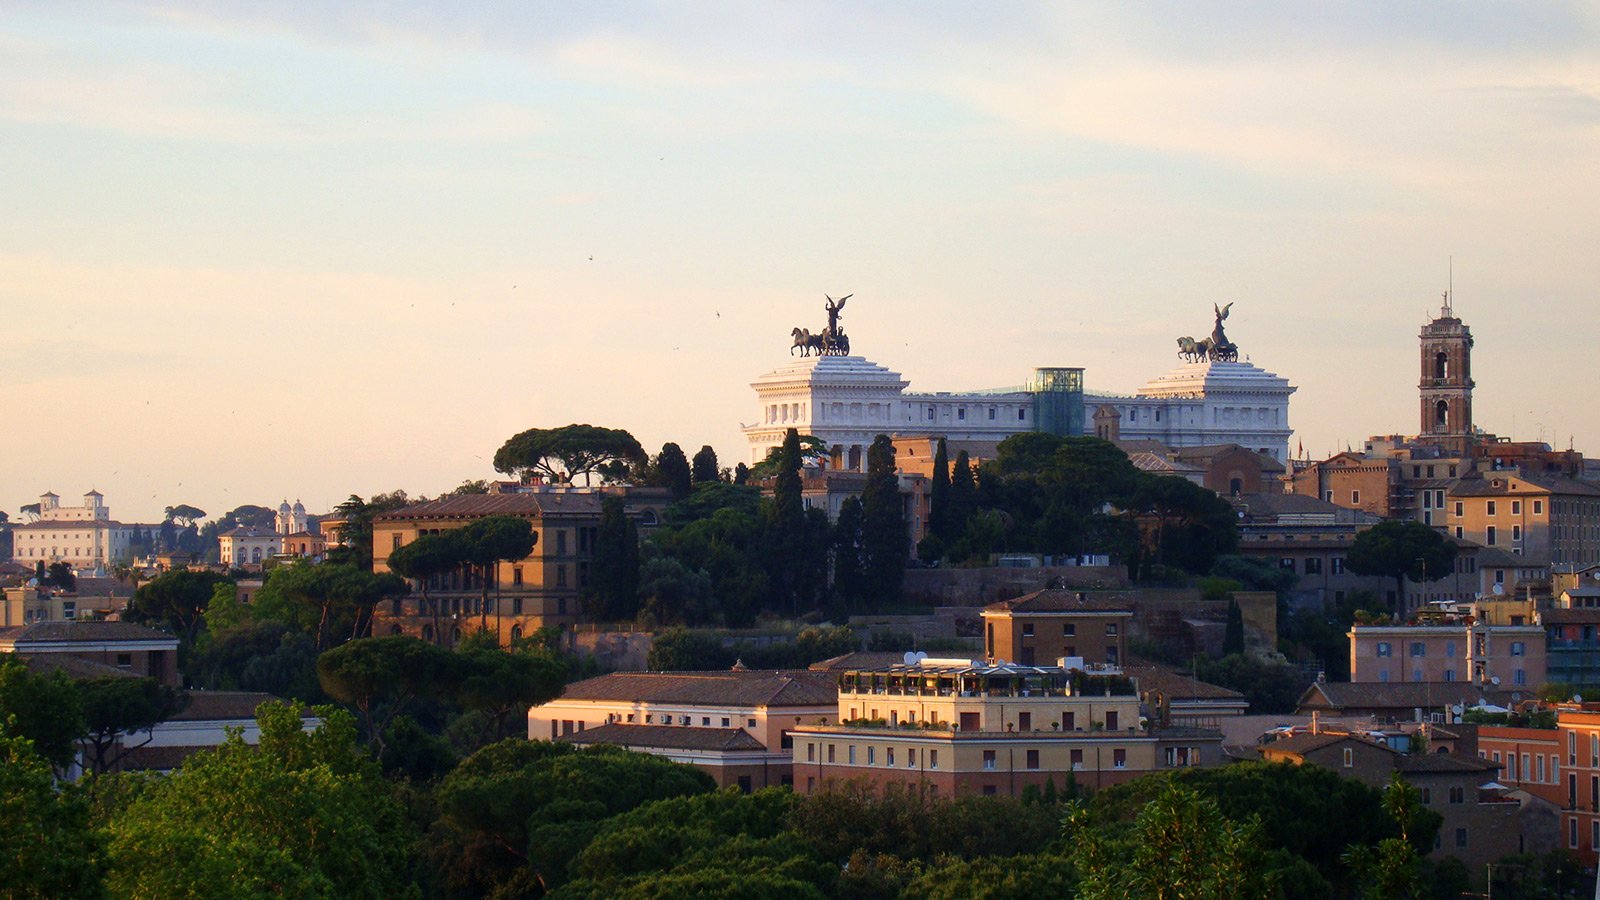 How to climb the Janiculum hill in Rome